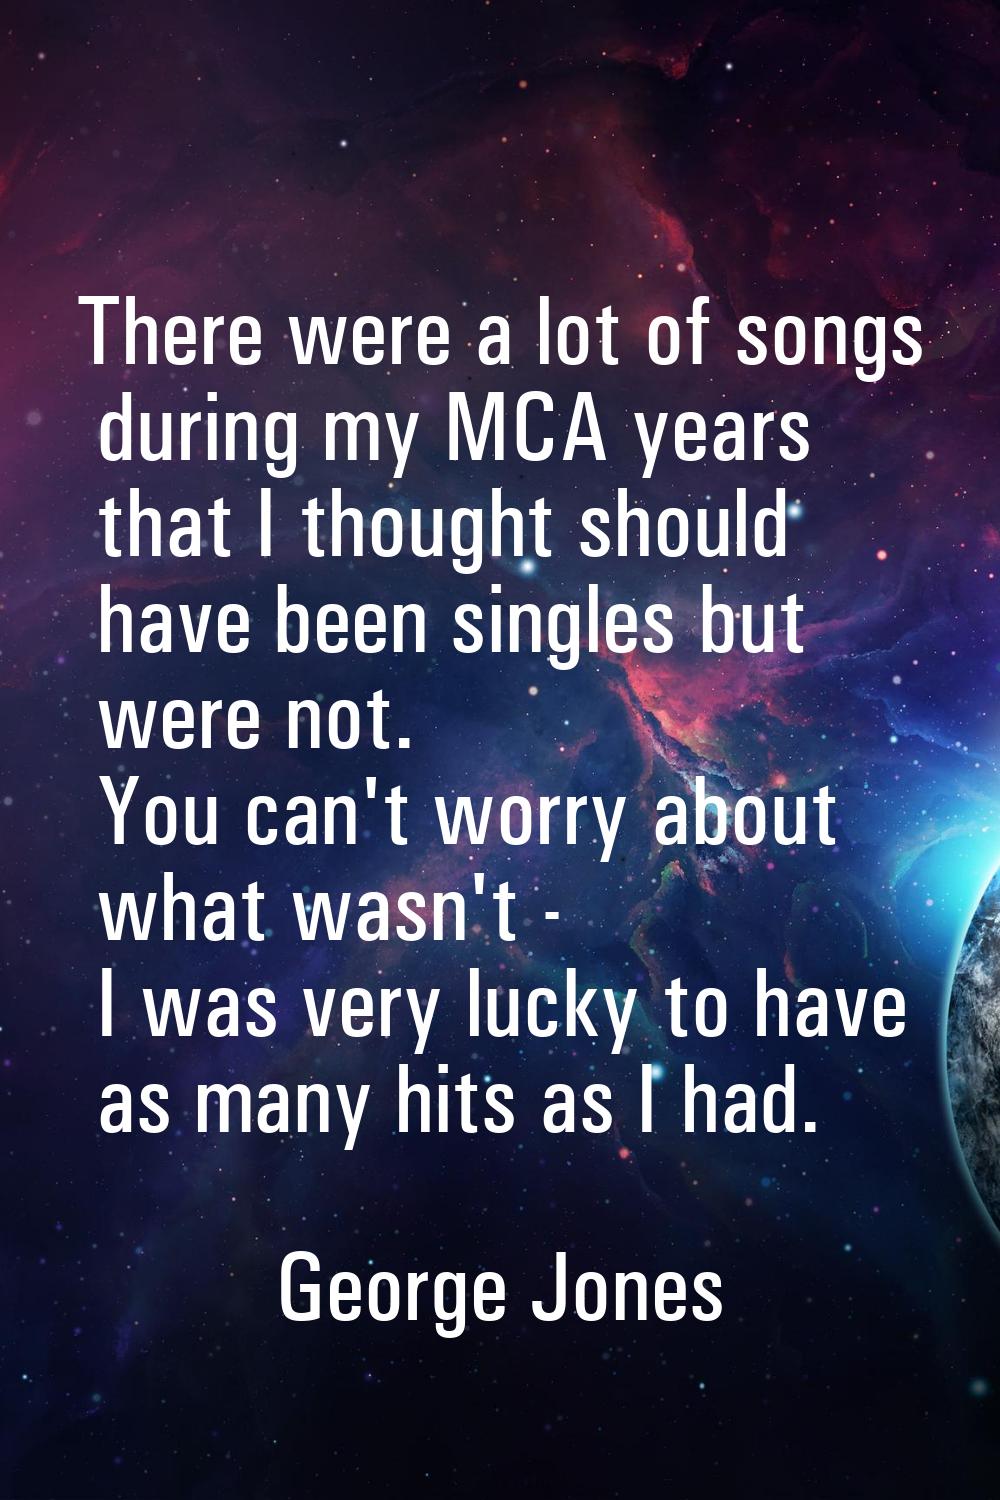 There were a lot of songs during my MCA years that I thought should have been singles but were not.